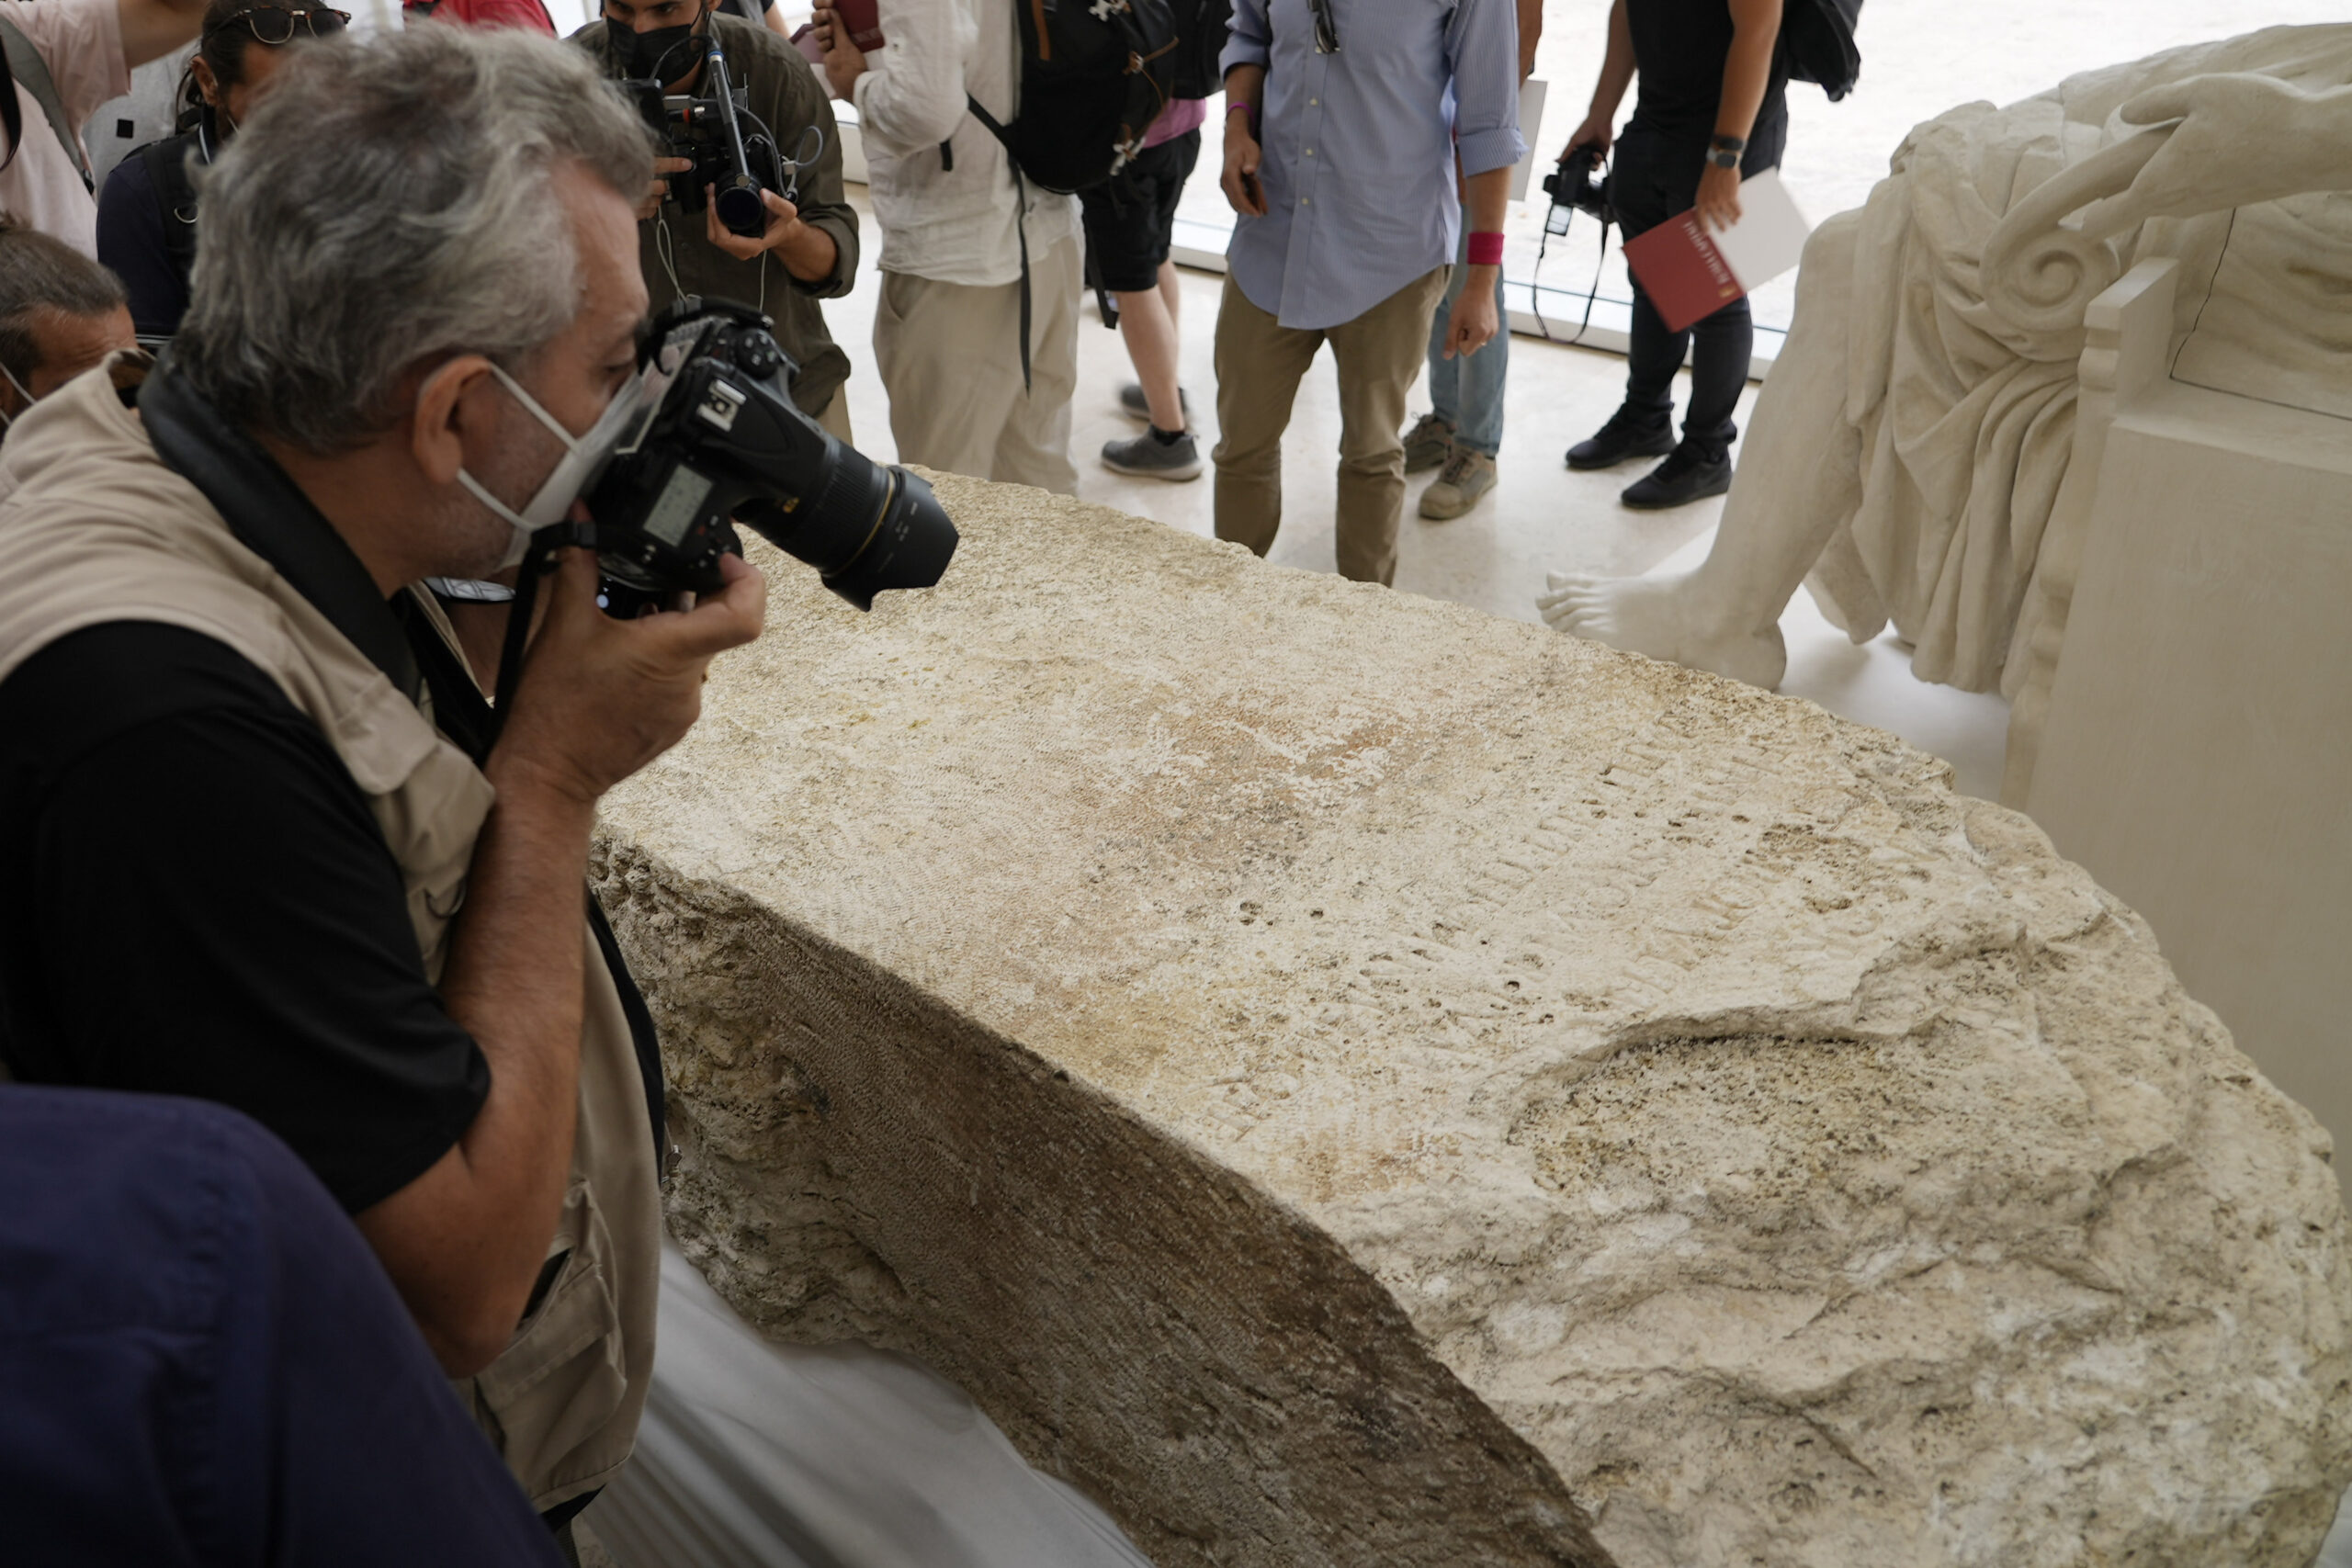 Photographers take pictures during the presentation to the press of an archeological finding emerged during the excavations at a Mausoleum in Rome, Friday, July 16, 2021. The monumental pomerial stone is dating back to Roman Emperor Claudio and was used to mark the ‘pomerium’ the sacred boundaries of the ‘Urbe’, the city of Rome, during the Roman empire. (AP Photo/Domenico Stinellis)